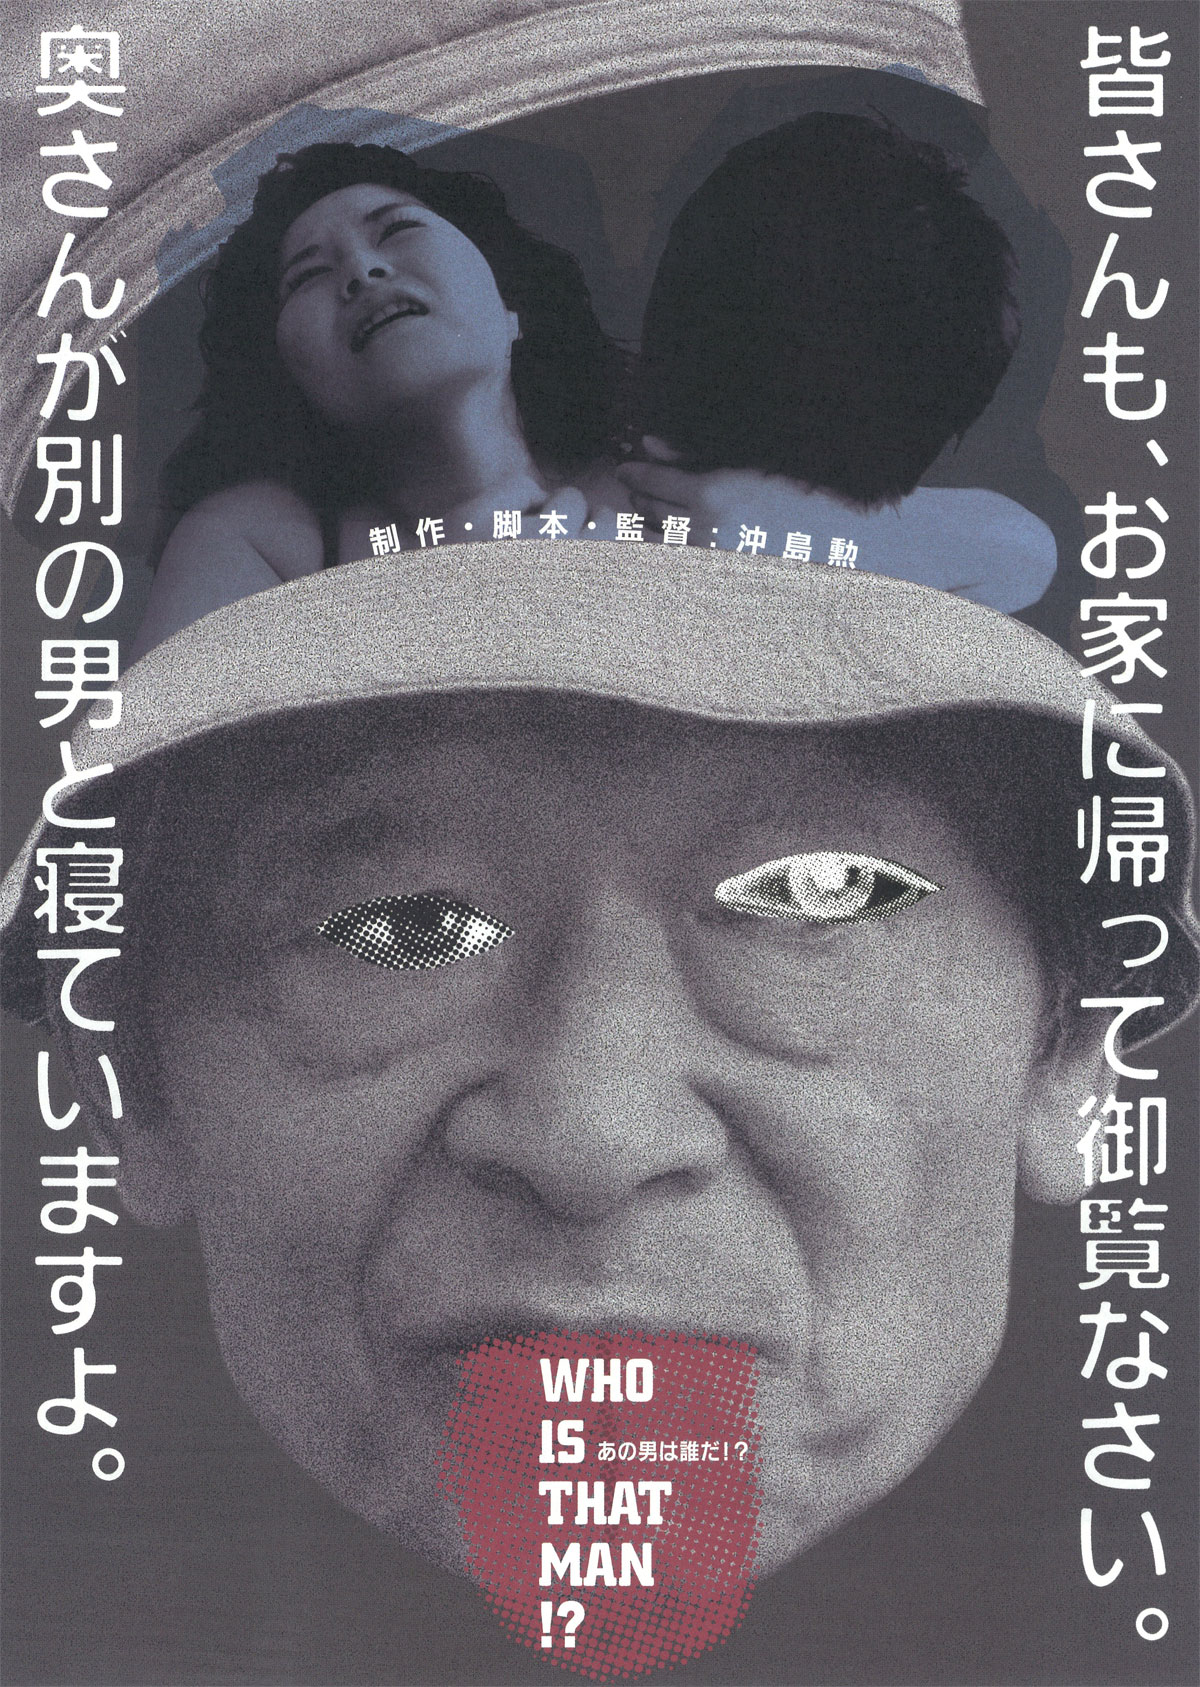 WHO IS THAT MAN!?　あの男は誰だ!?の画像